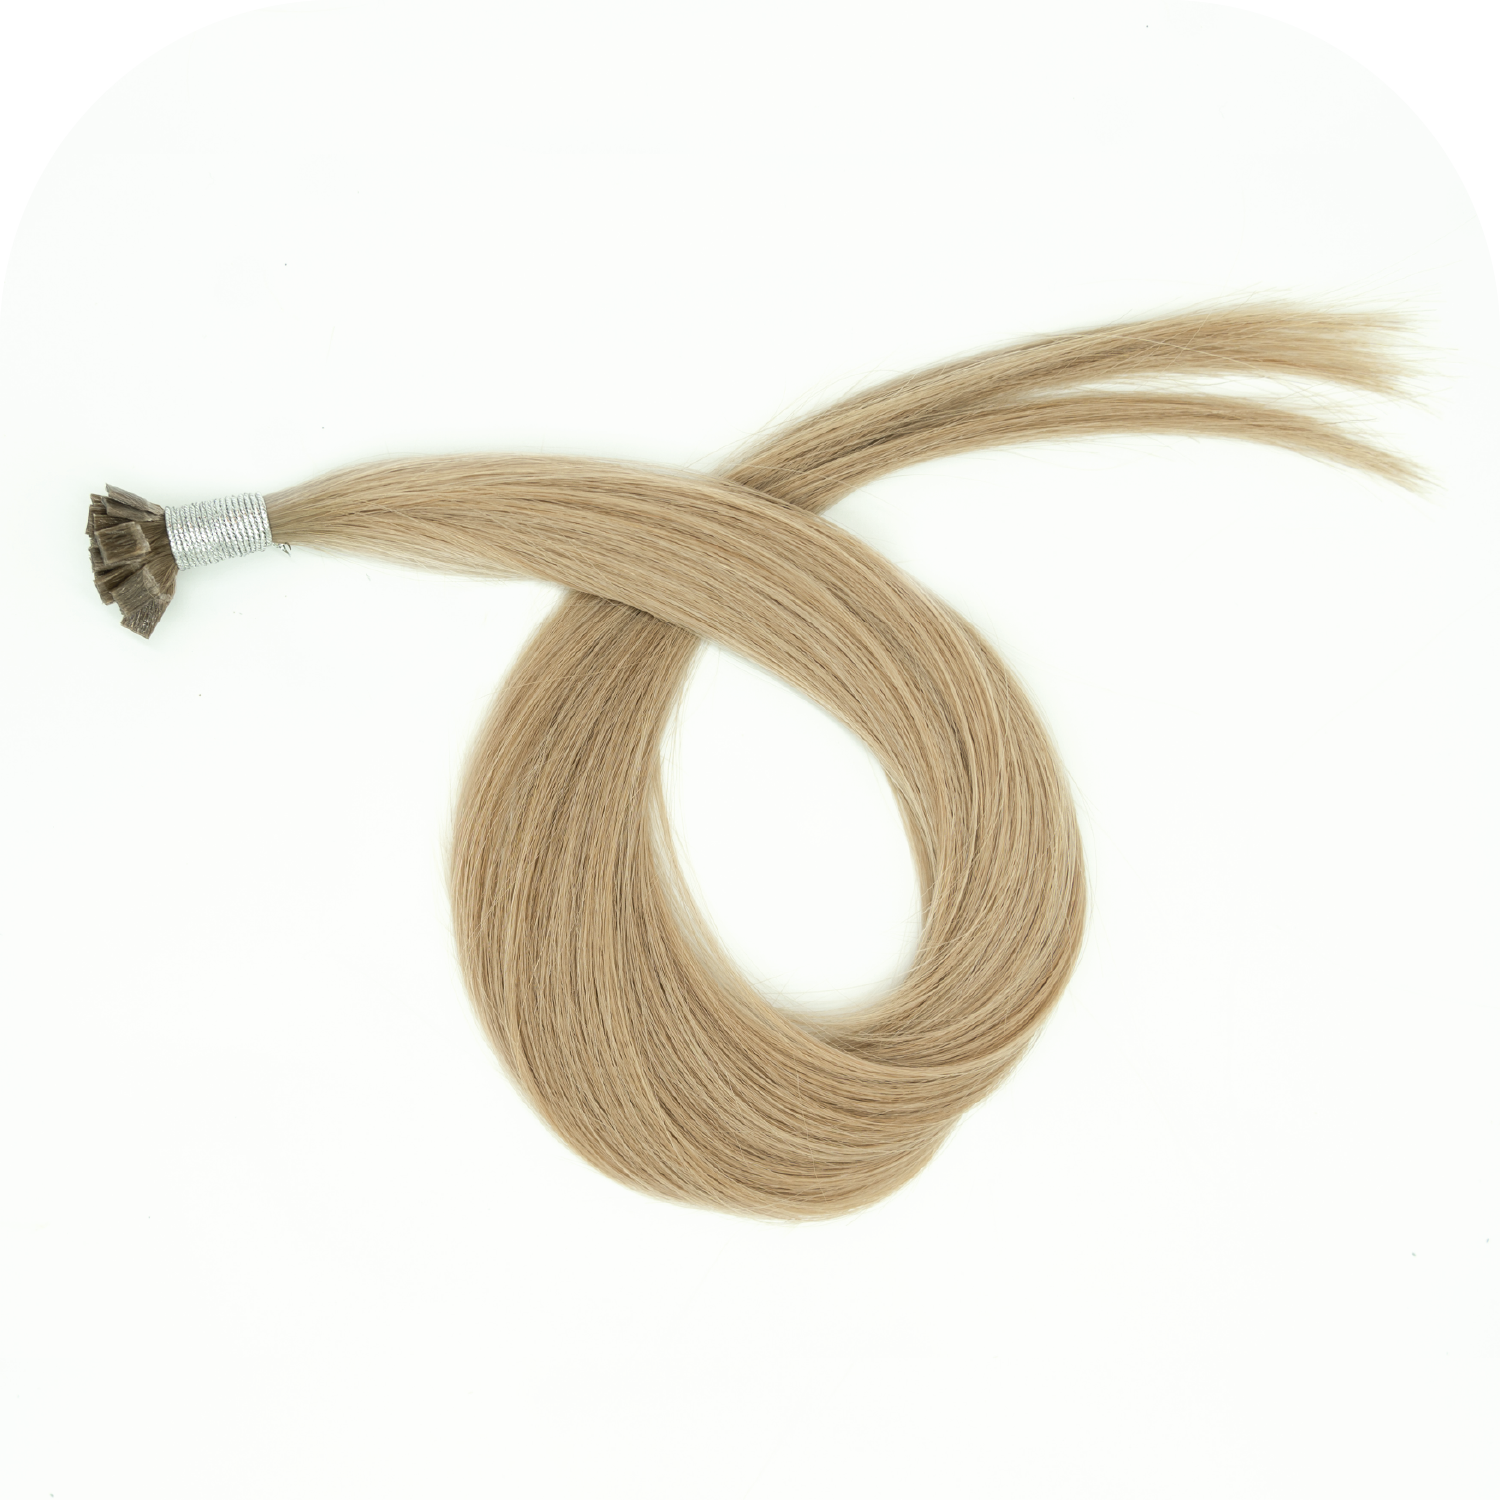 Couture Hair Co. Couture Top or K Tip Hair Extensions in Color Warm Blonde Mix 